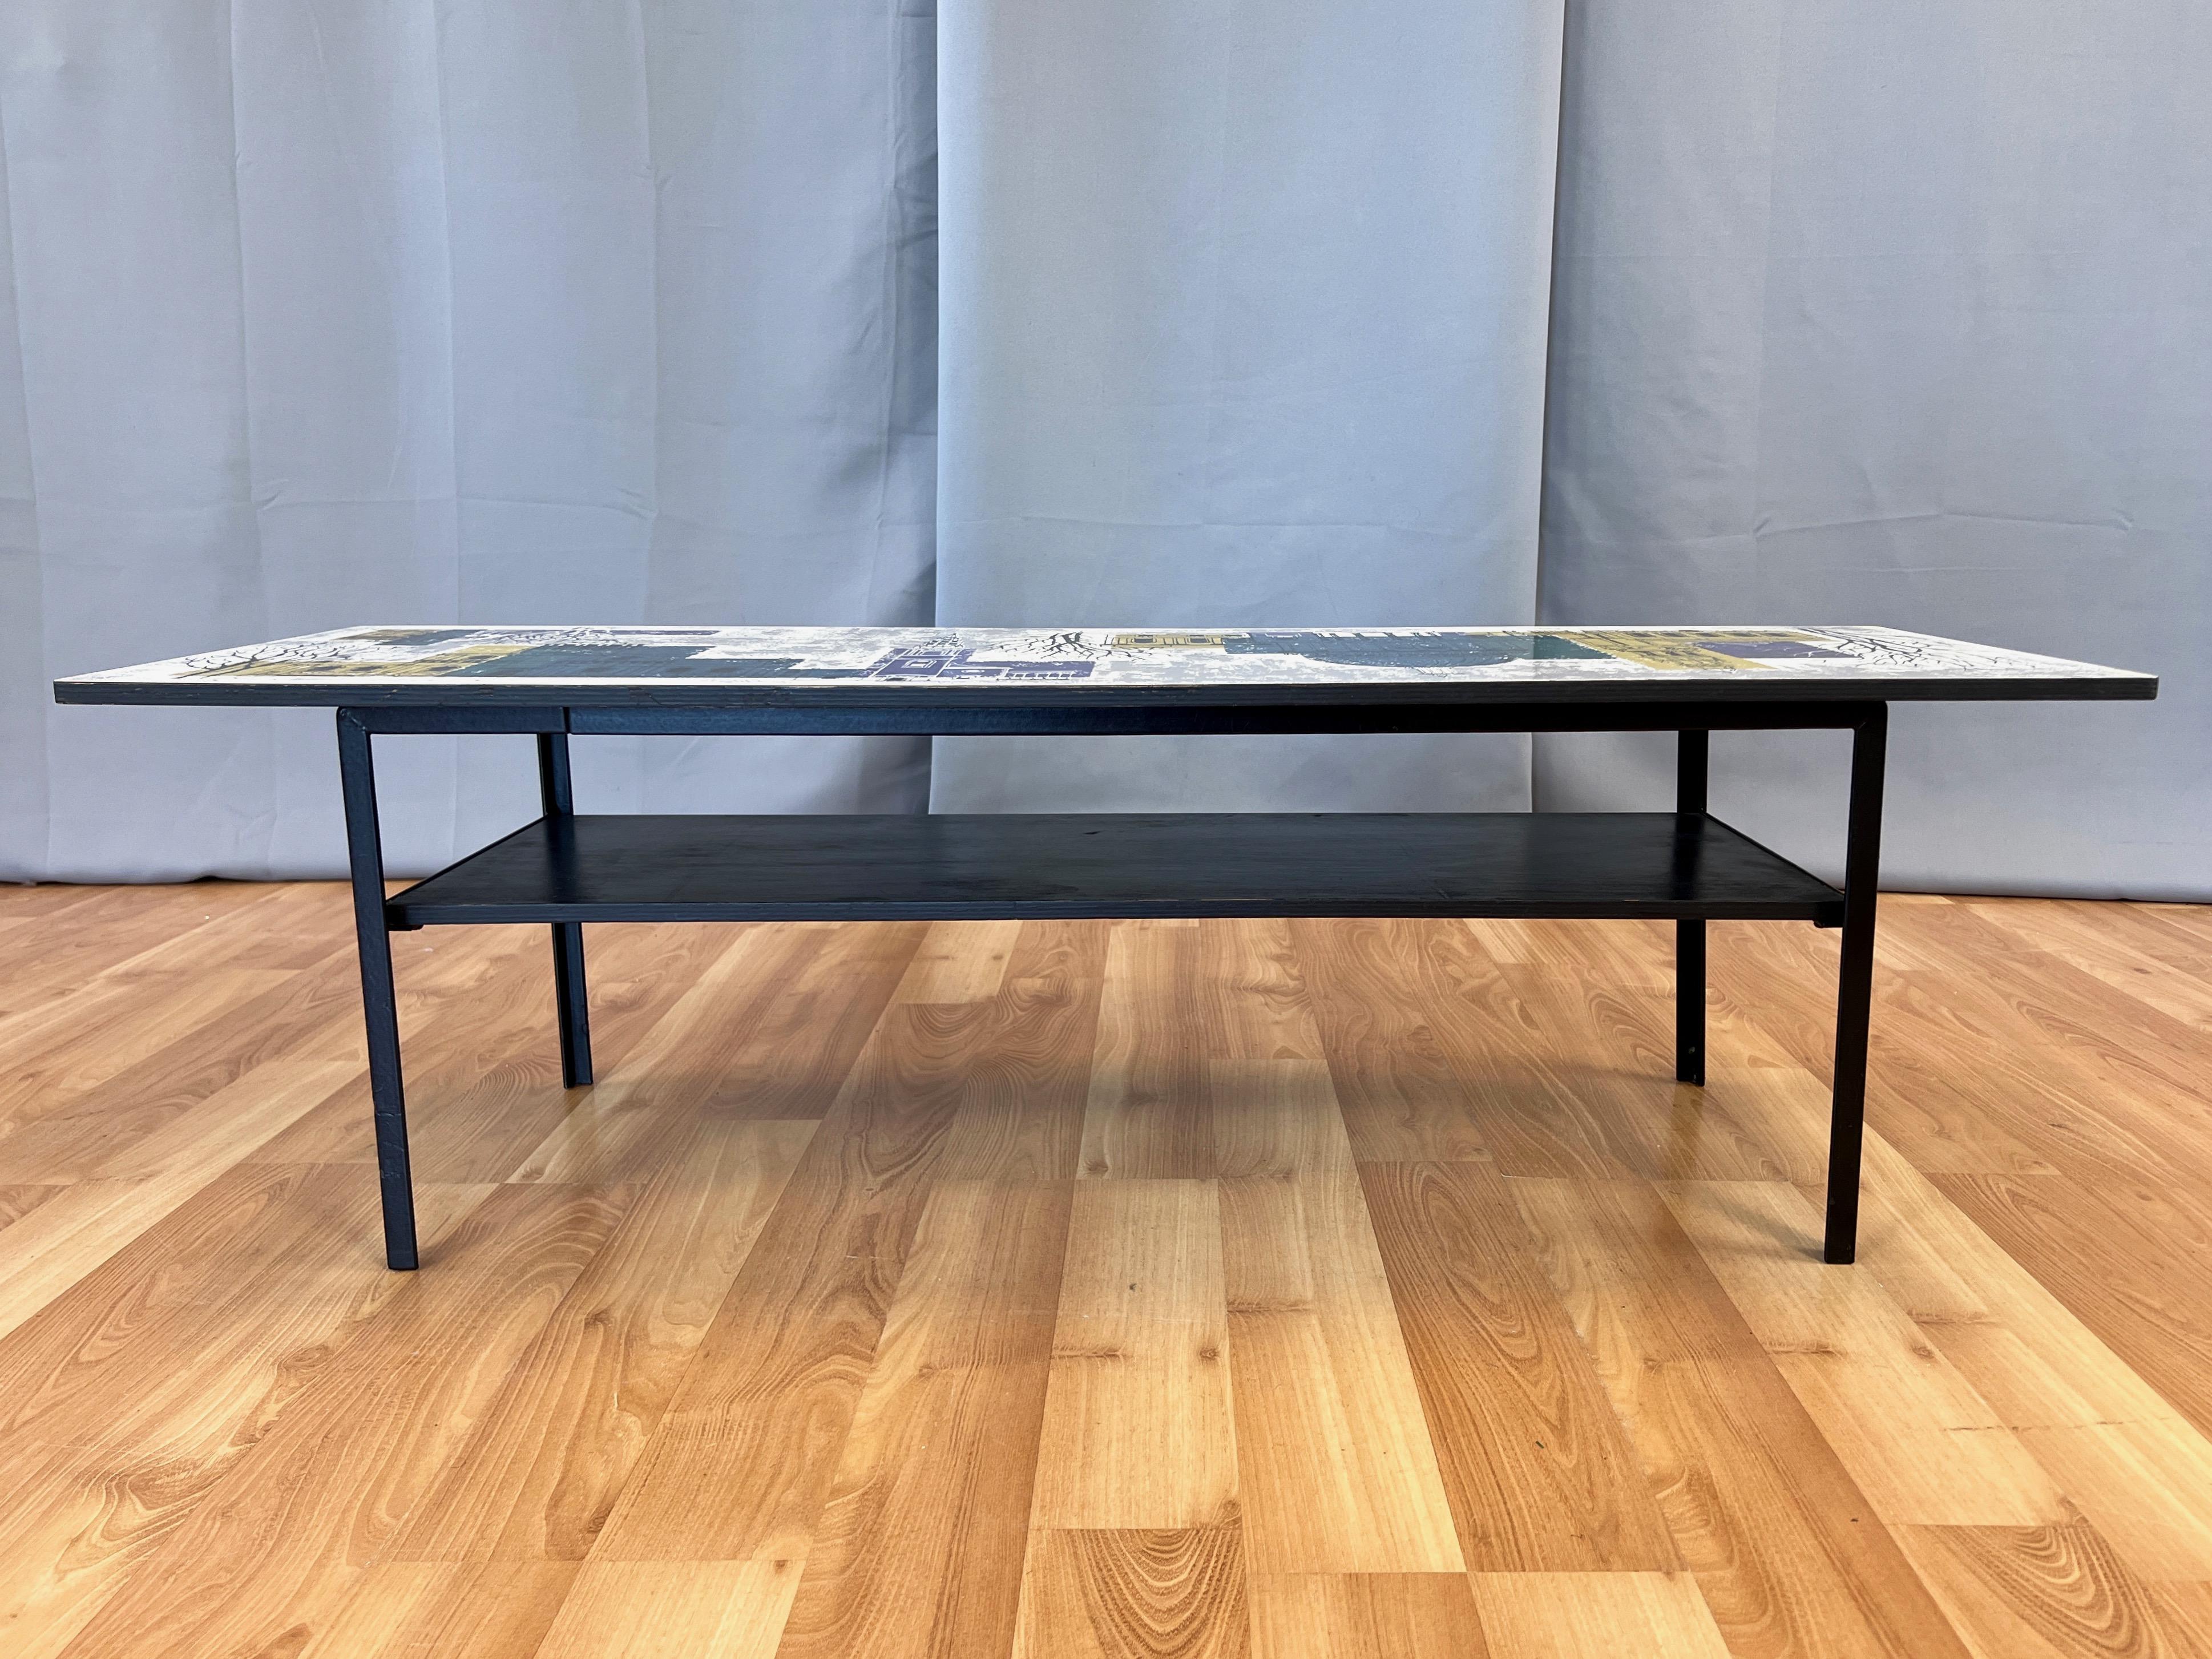 John Piper London Skyline Coffee Table by Myer for Conran and Heal’s, c. 1960 For Sale 7